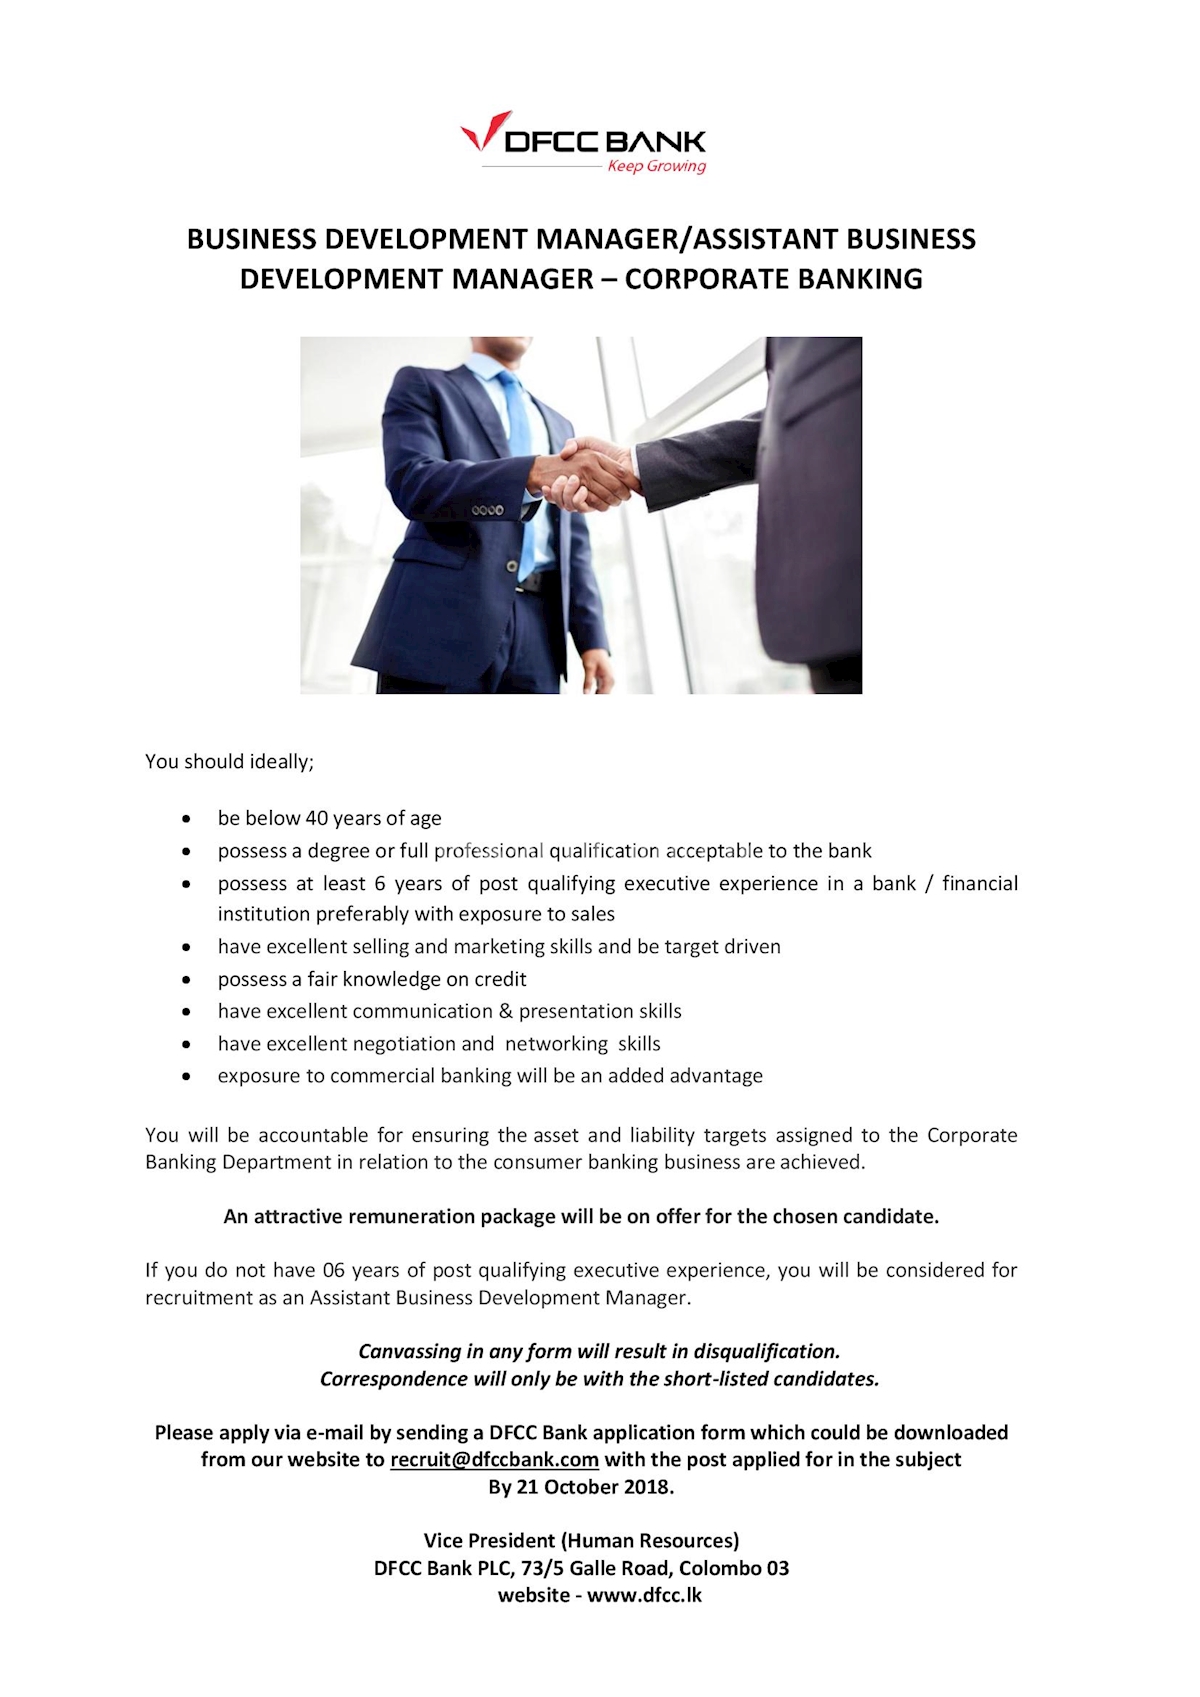 Business Development Manager / Assistant Business Development Manager - Corporate Banking